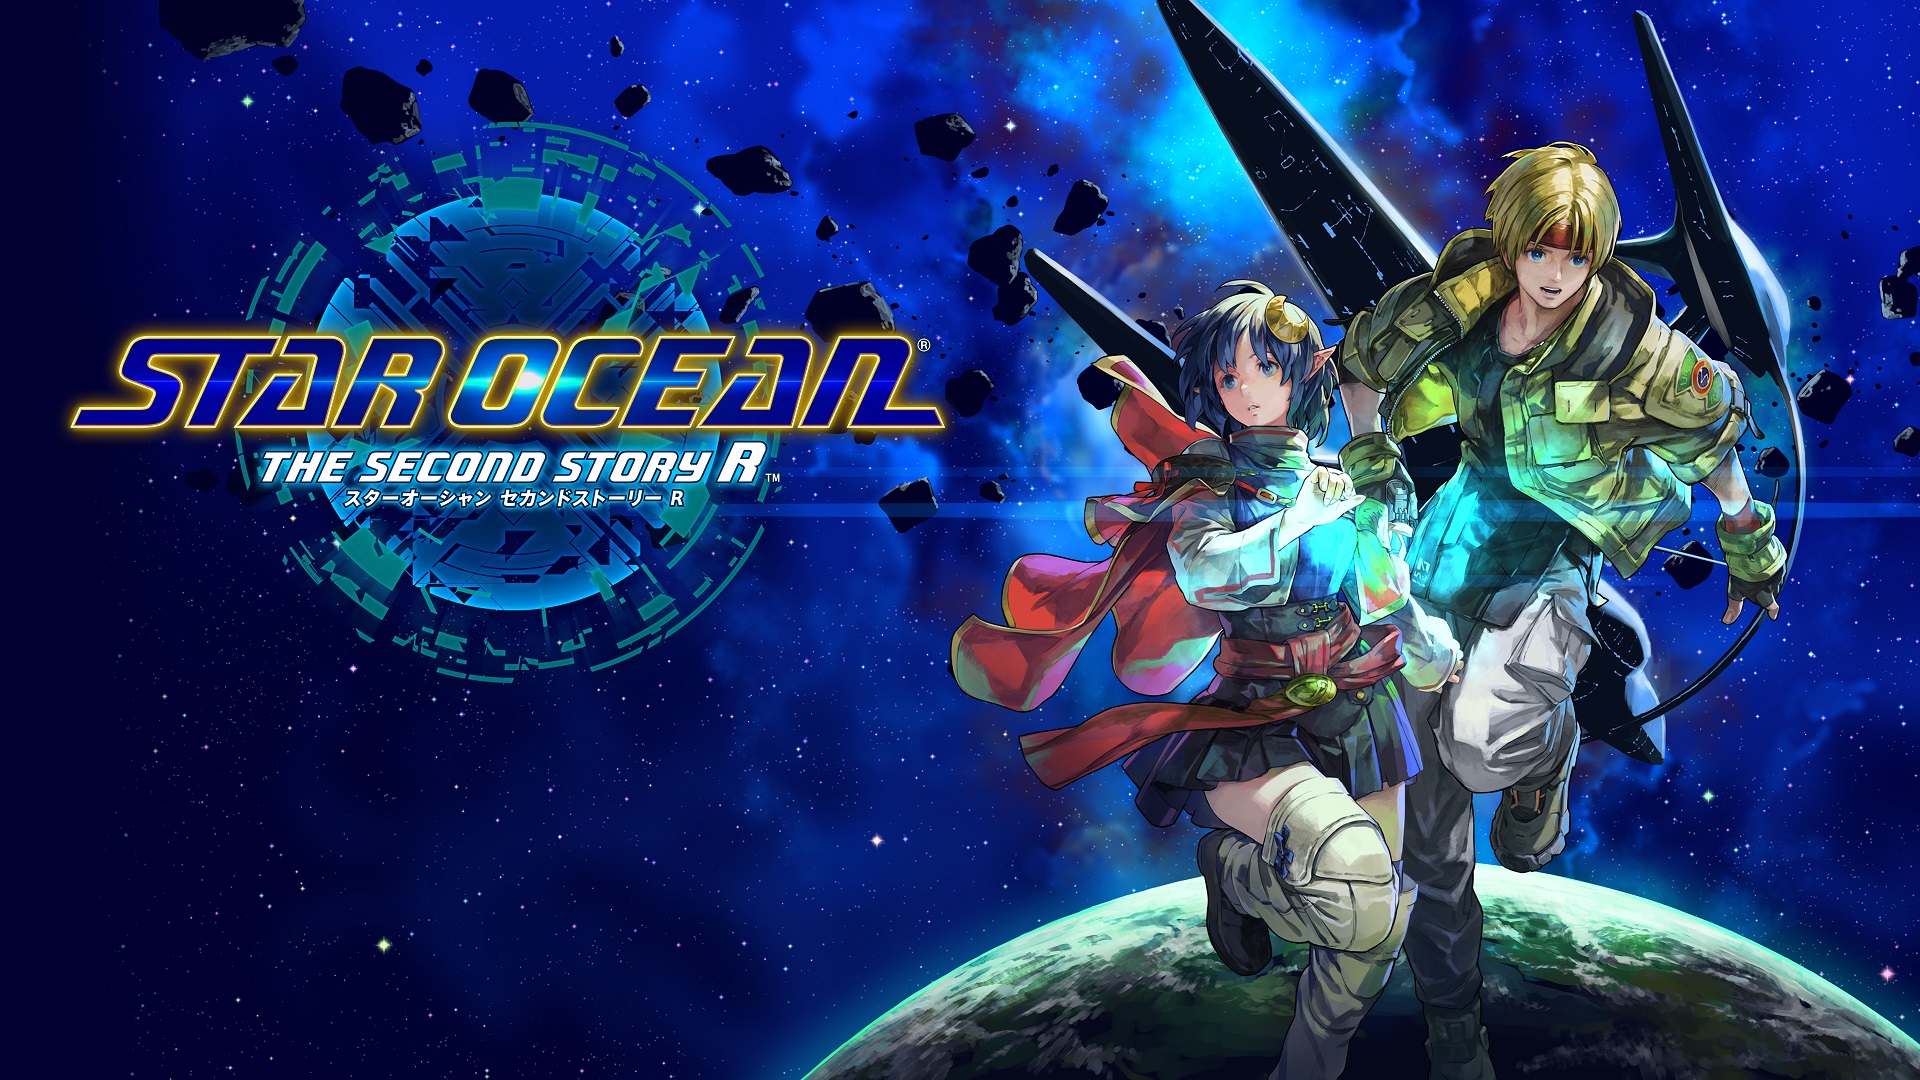 Review: Star Ocean: The Second Story R (Nintendo Switch version) |  Aurabolt's Game Blog